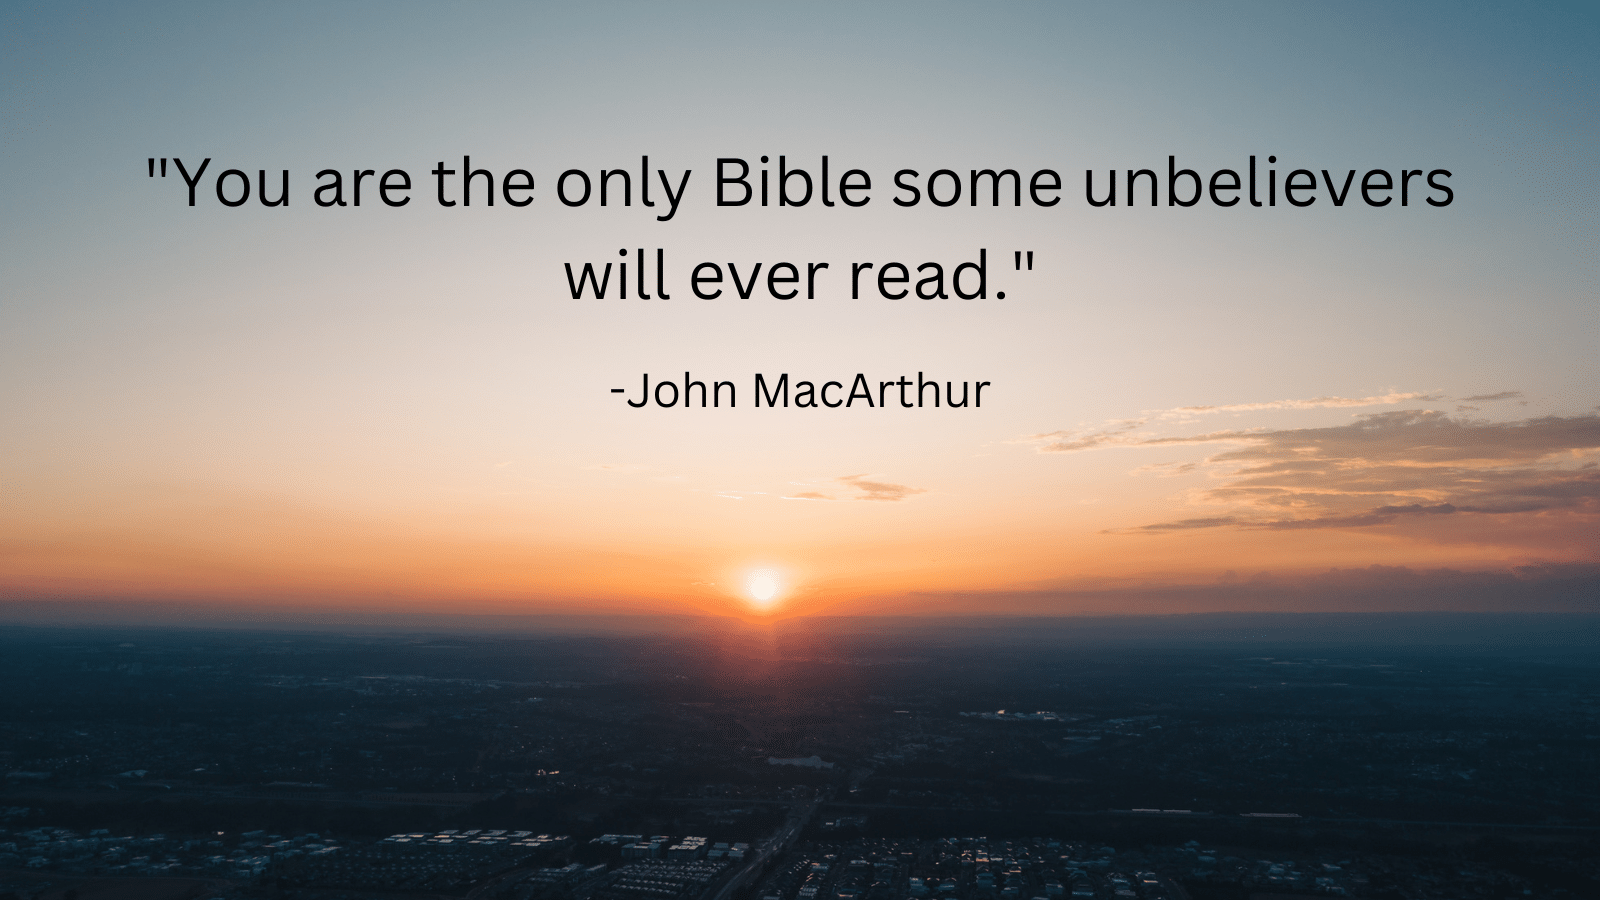 City at sunset with John MacArthur quote